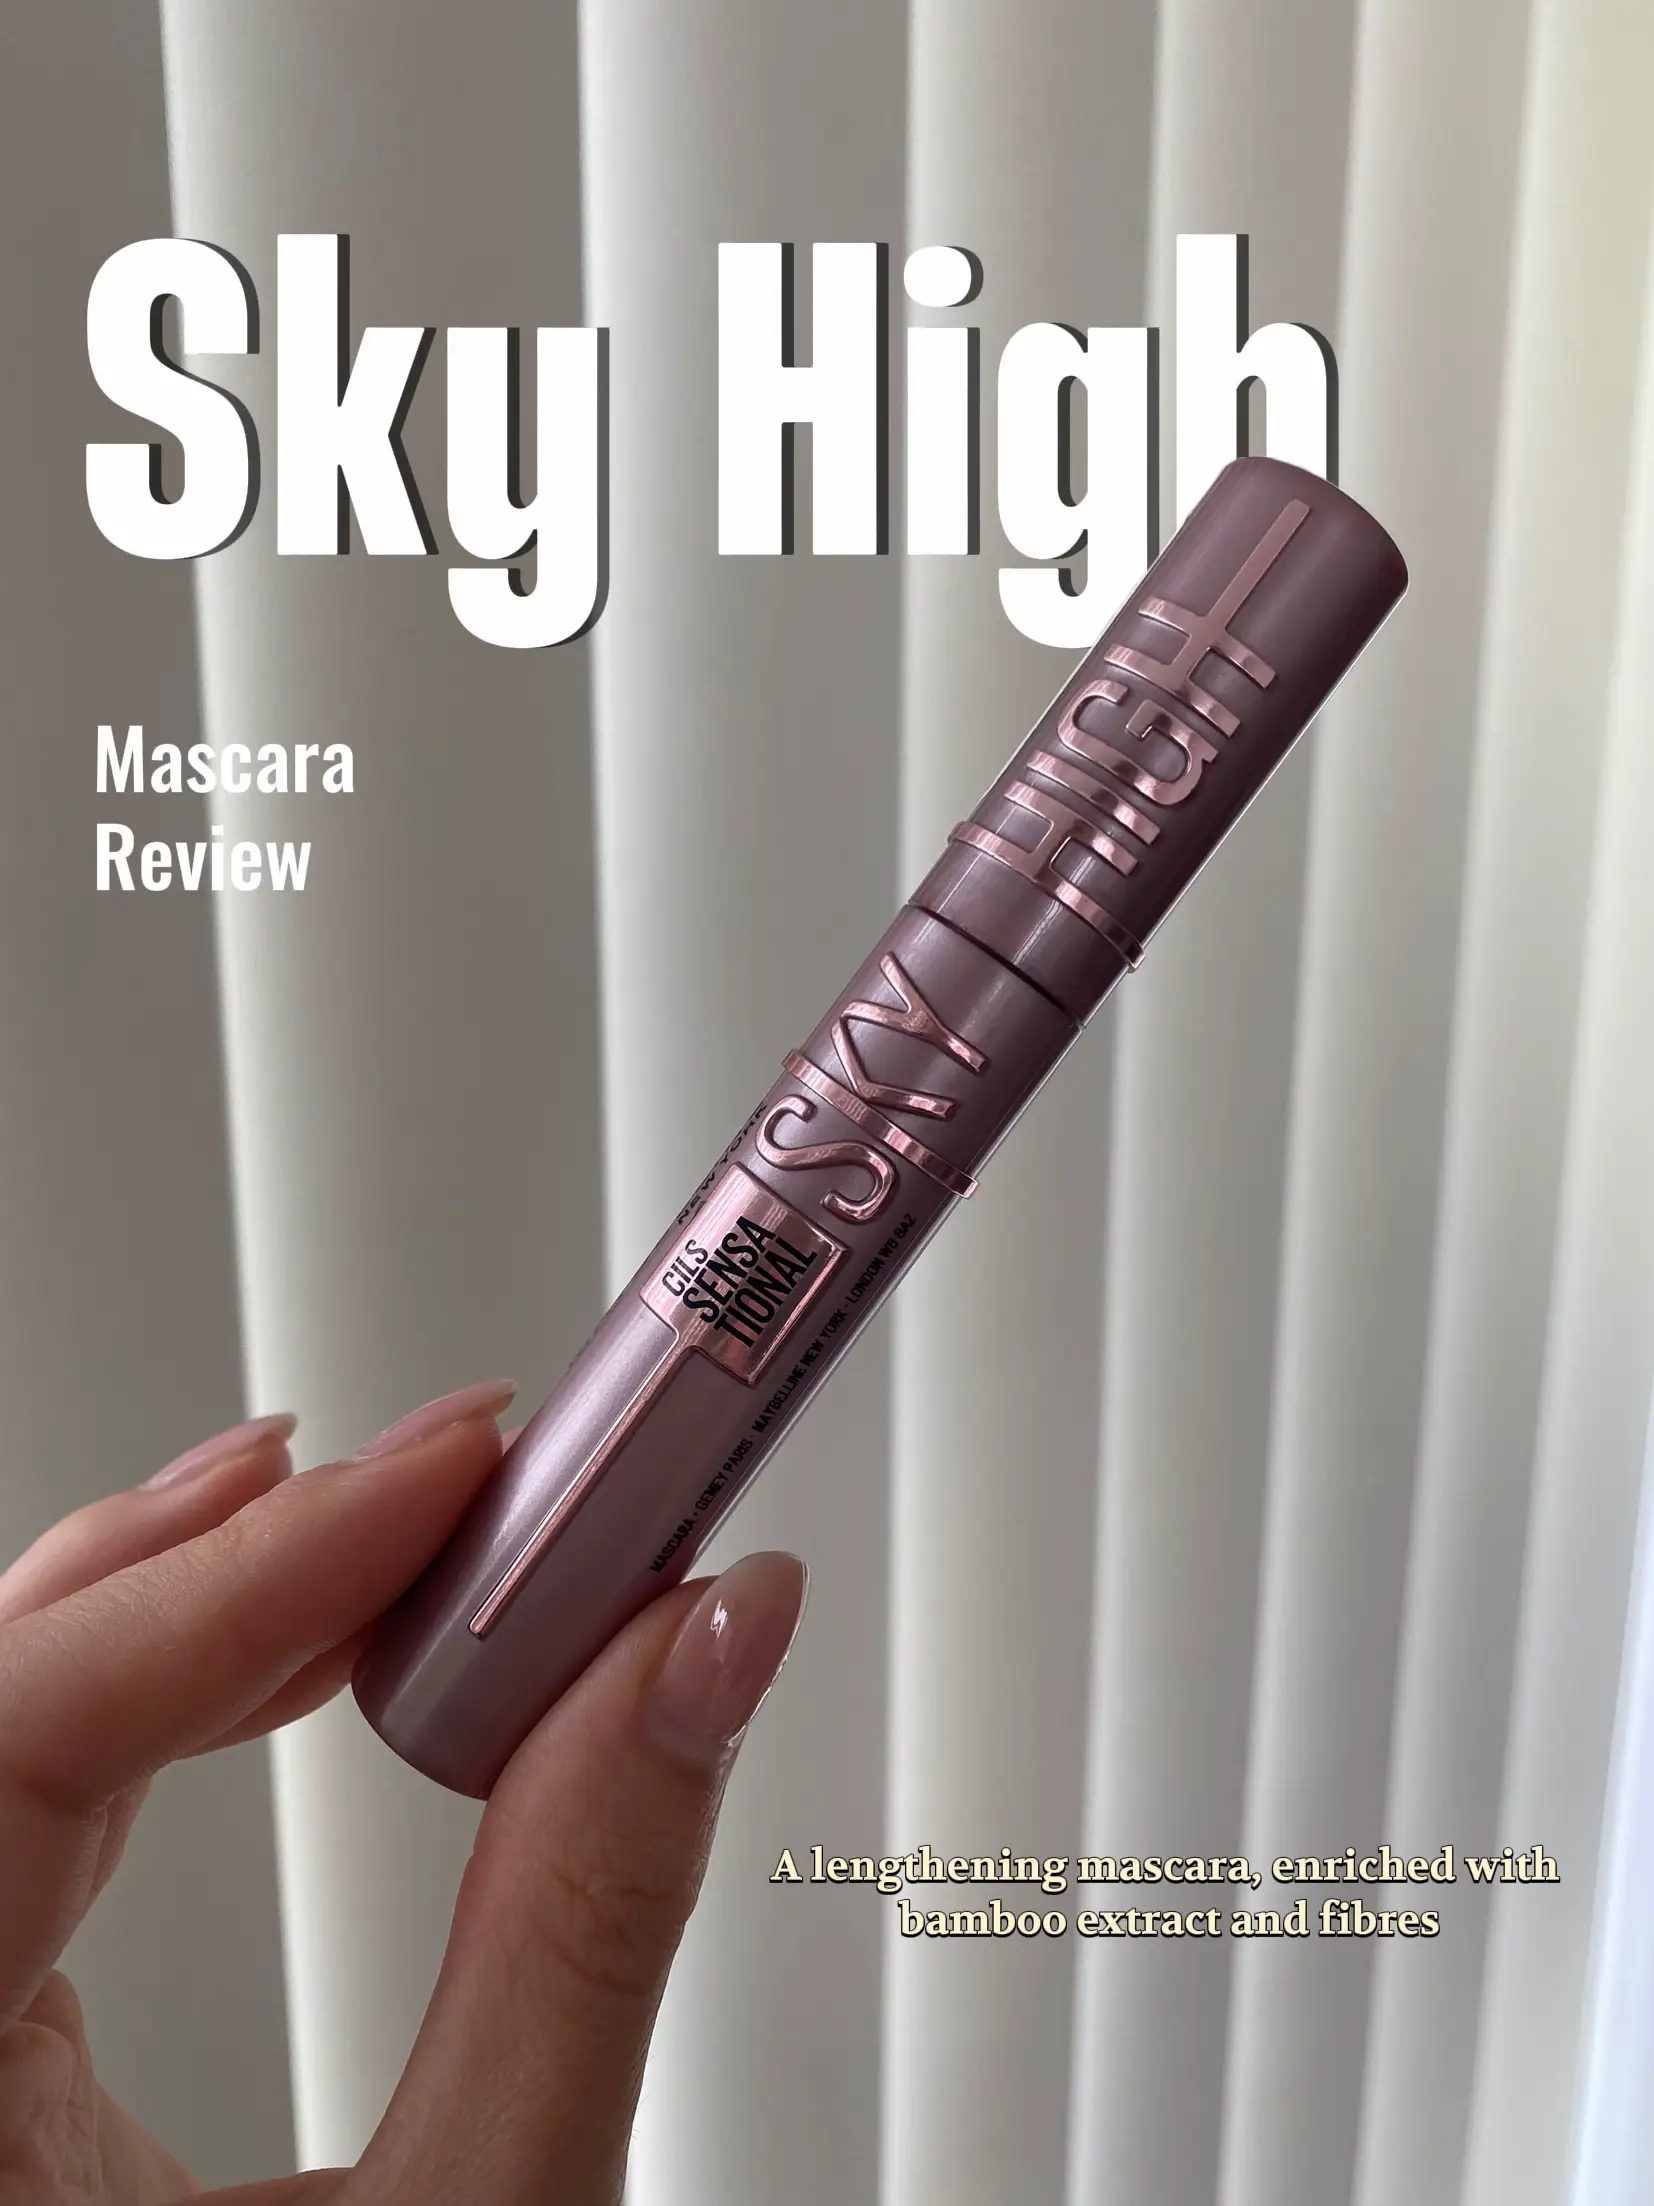 Maybelline by High | Lemon8 posted | Diana | Mascara Review Sky Paceana Gallery